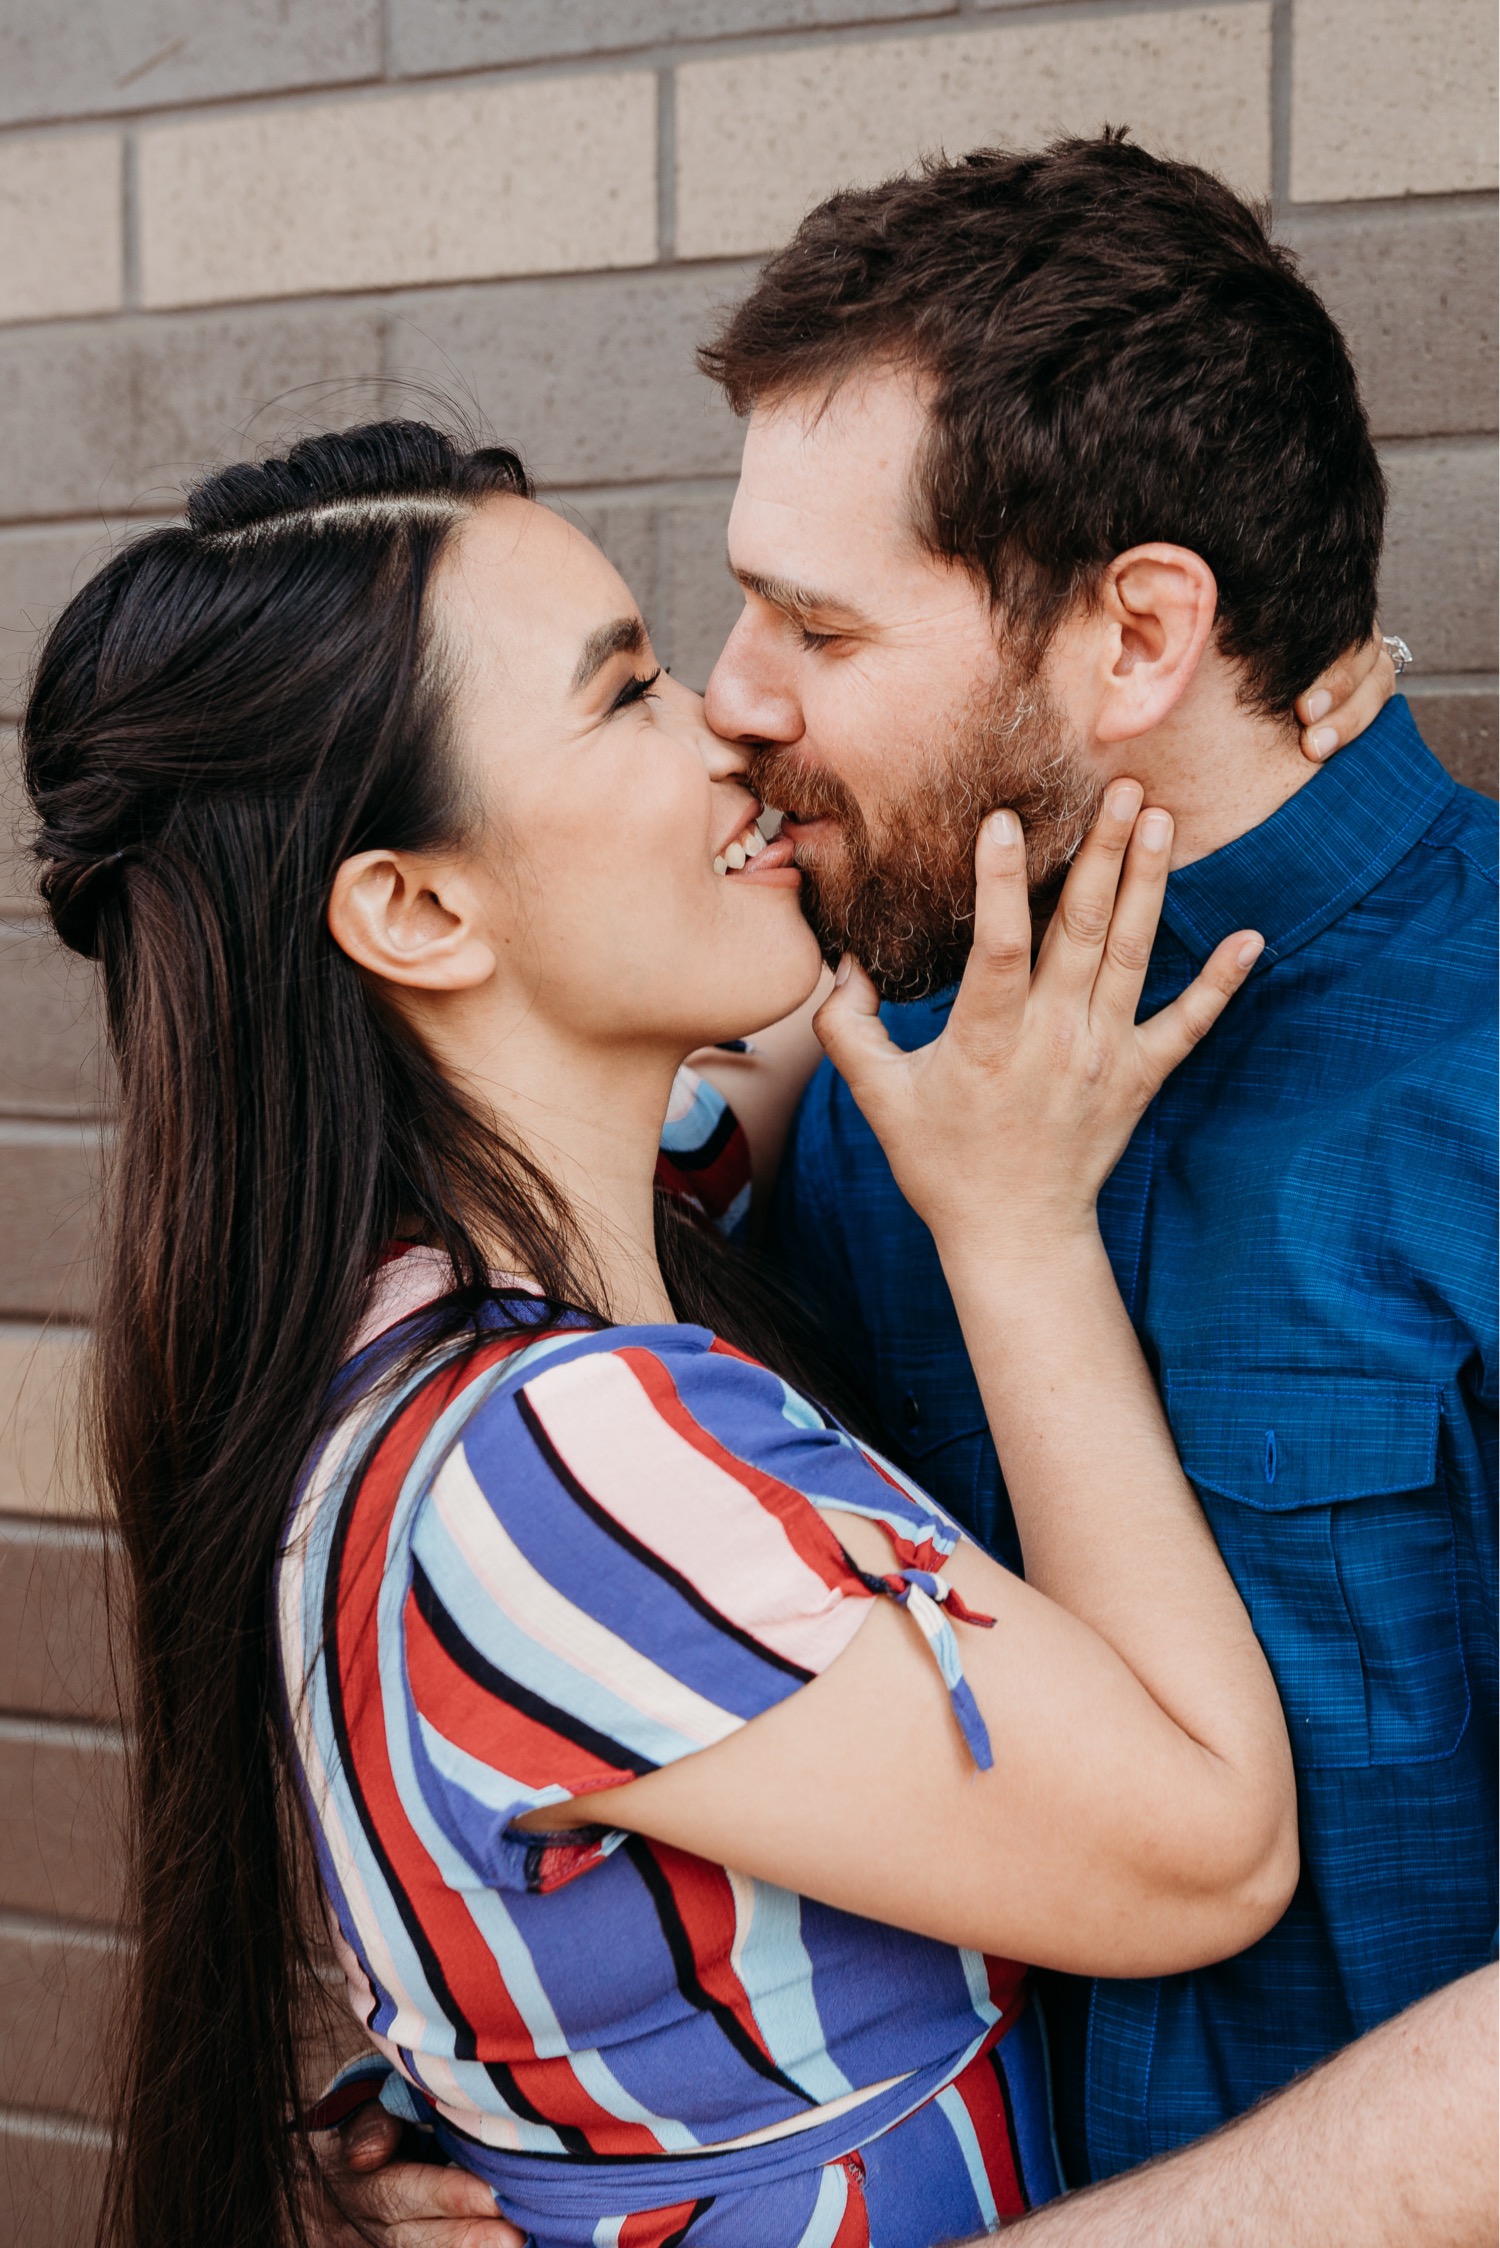 Woman sticks tongue out at fiance as he goes in for a kiss during their engagement photos.